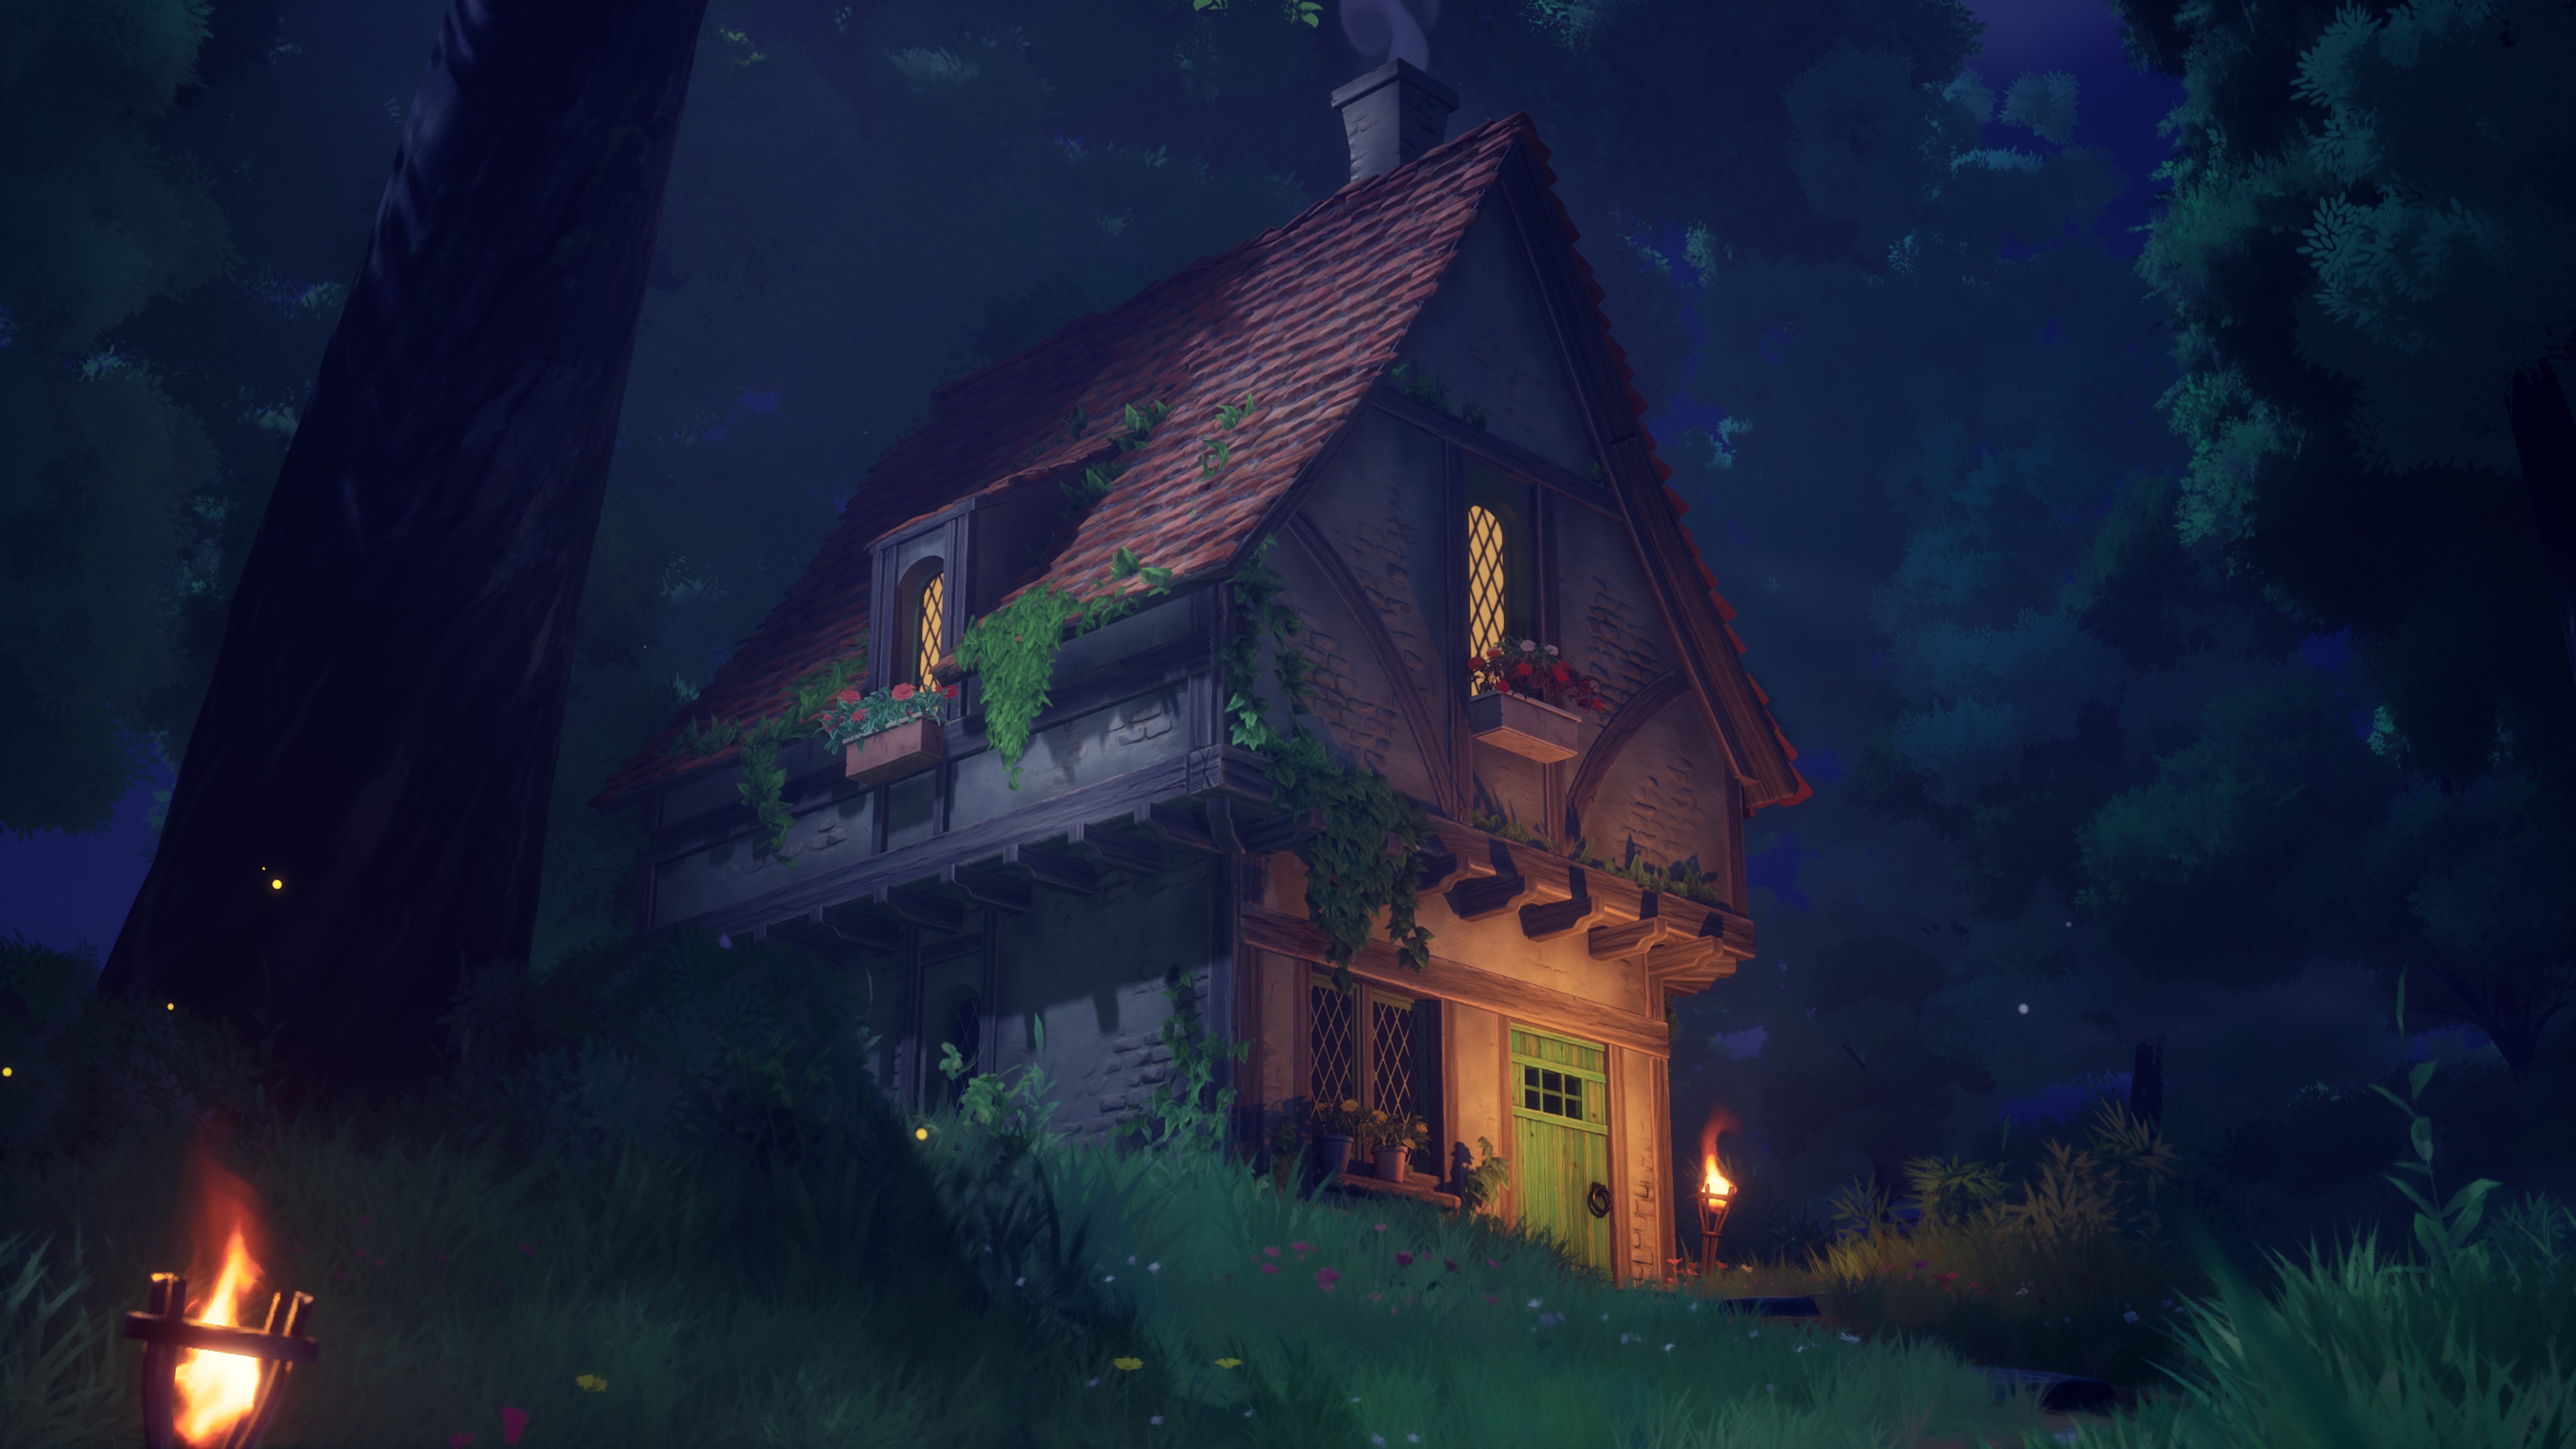 PC WALLPAPER 4K COZY FOREST HOUSE